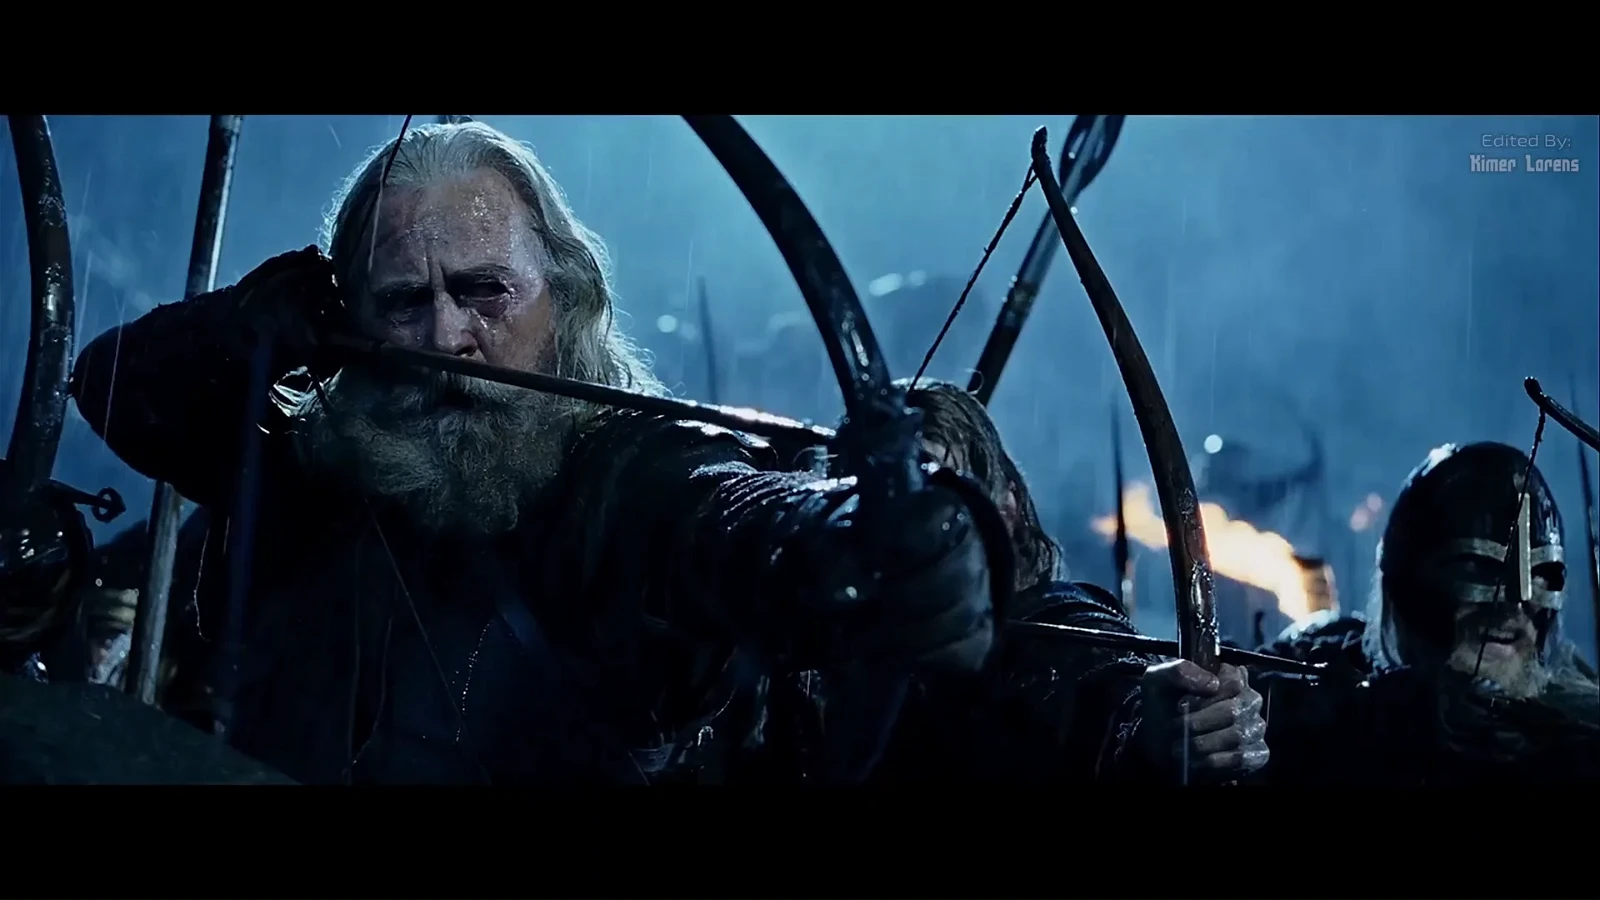 The old archer in The Lord of the Rings: The Two Towers